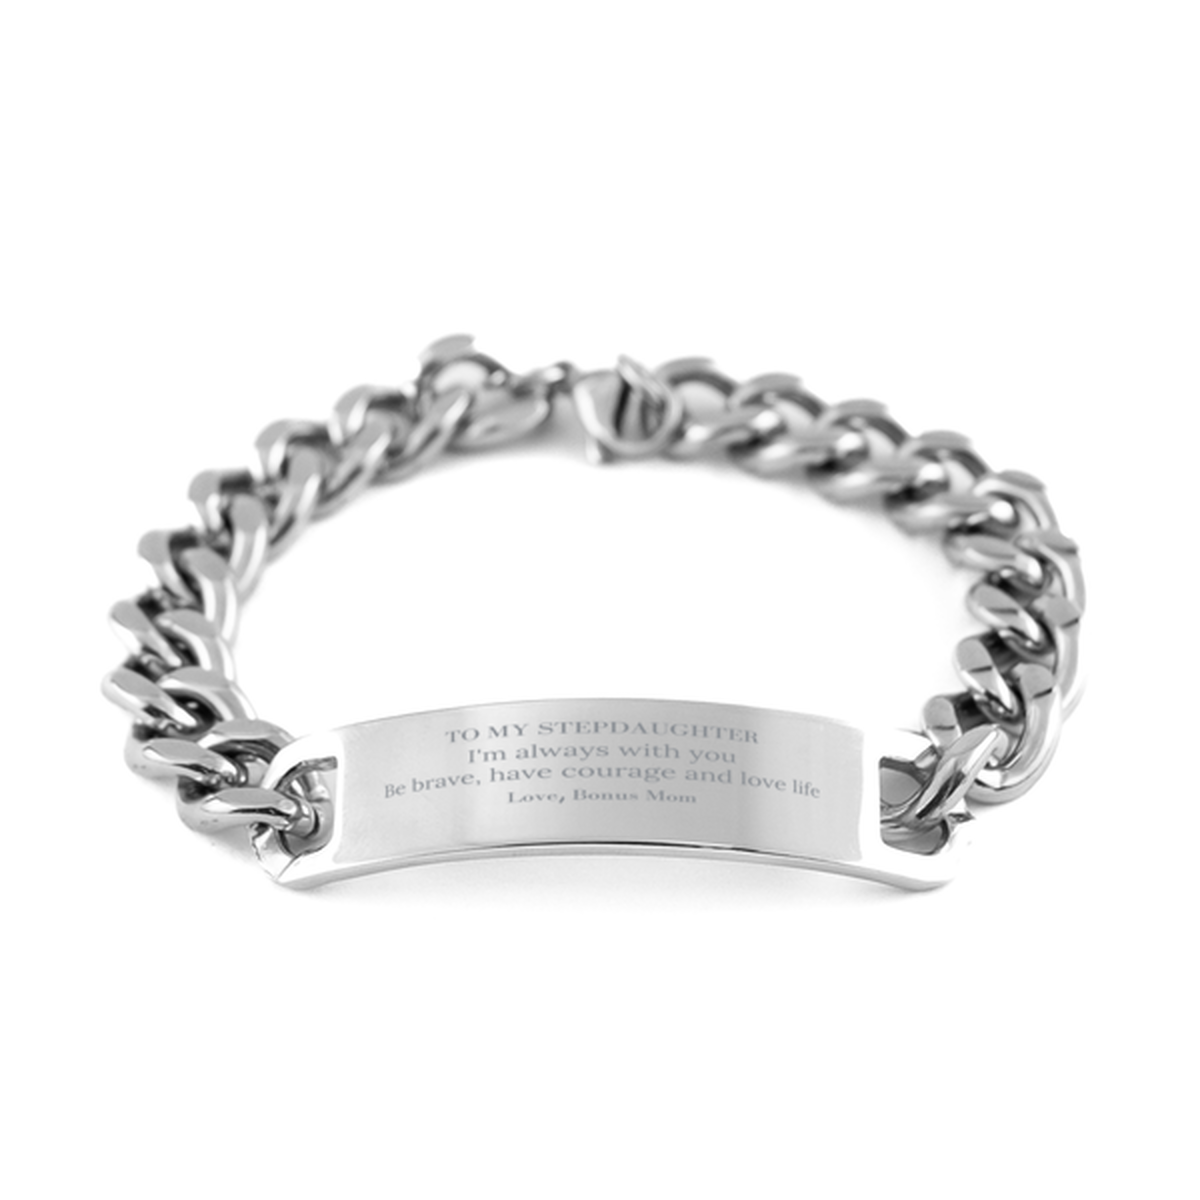 To My Stepdaughter Gifts from Bonus Mom, Unique Cuban Chain Stainless Steel Bracelet Inspirational Christmas Birthday Graduation Gifts for Stepdaughter I'm always with you. Be brave, have courage and love life. Love, Bonus Mom